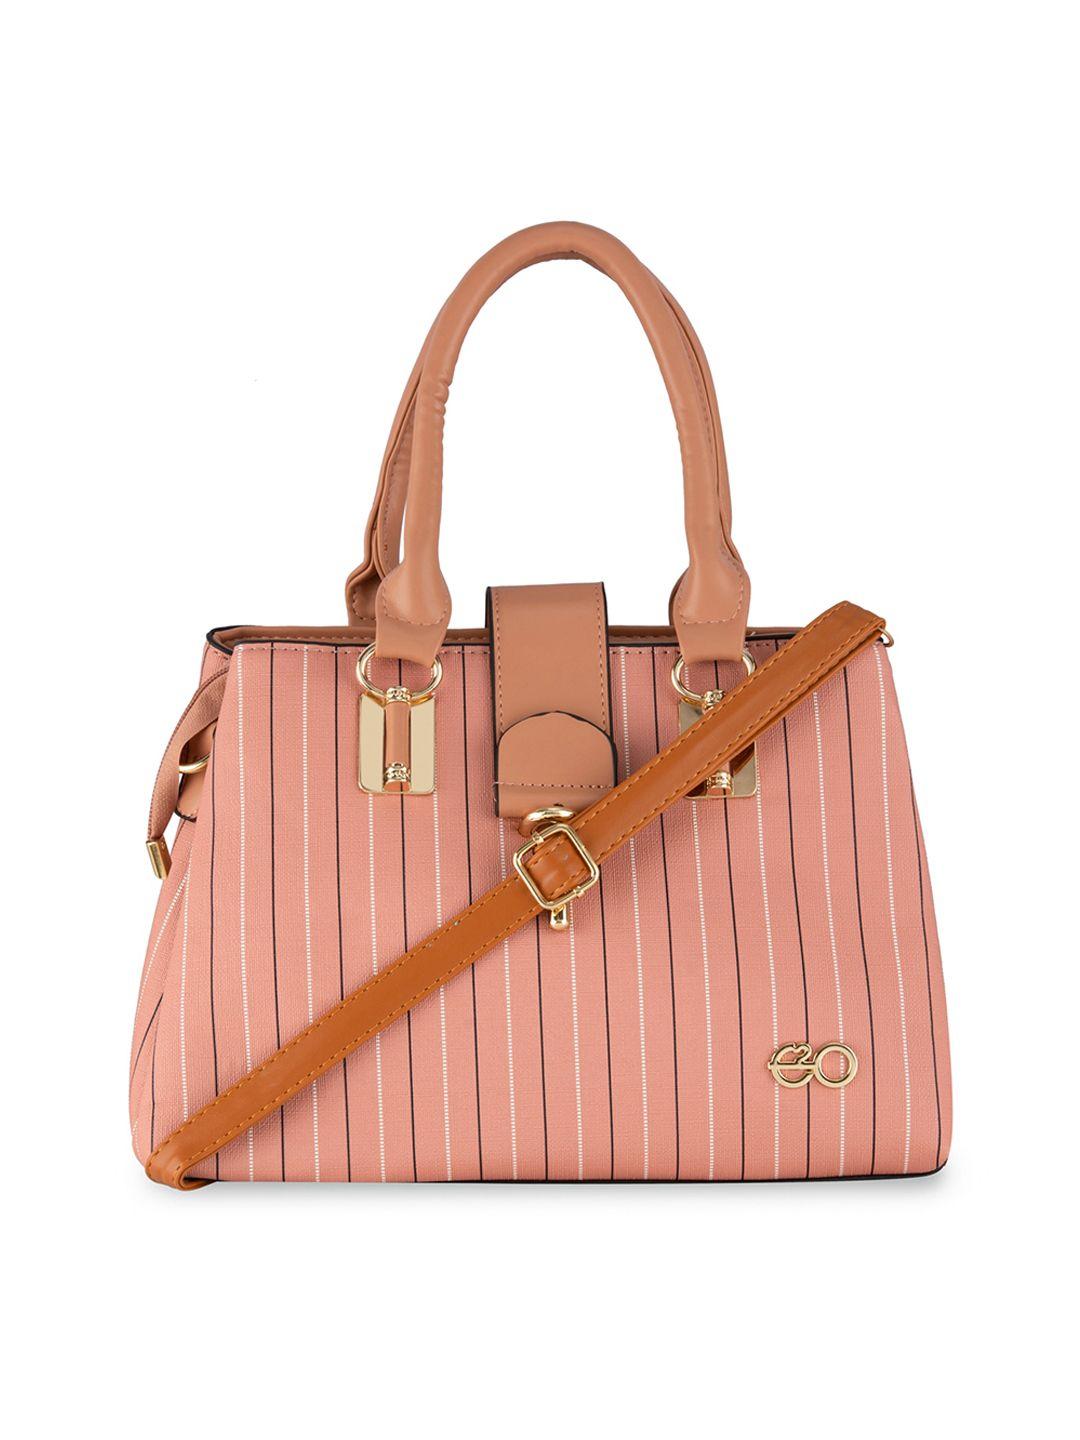 e2o pink striped pu structured handheld bag with tasselled